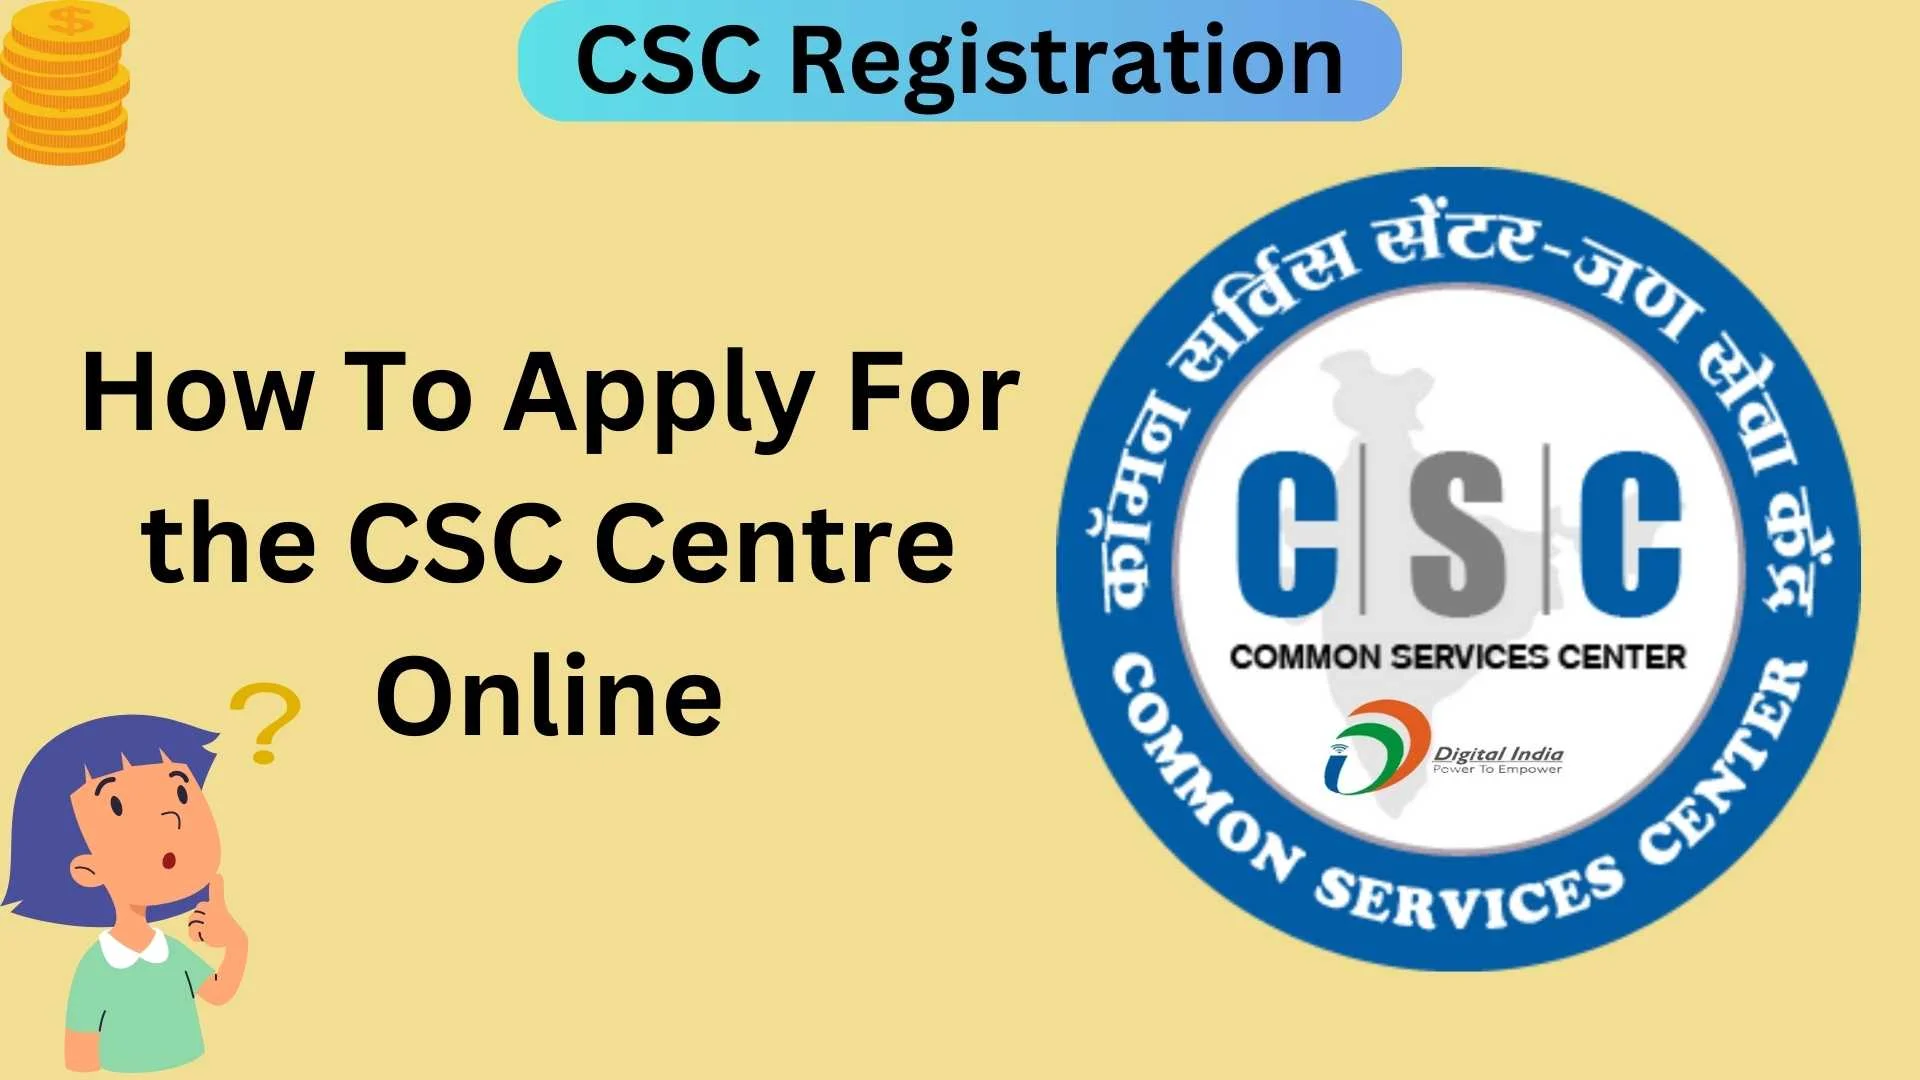 How To Apply For the CSC Centre Online